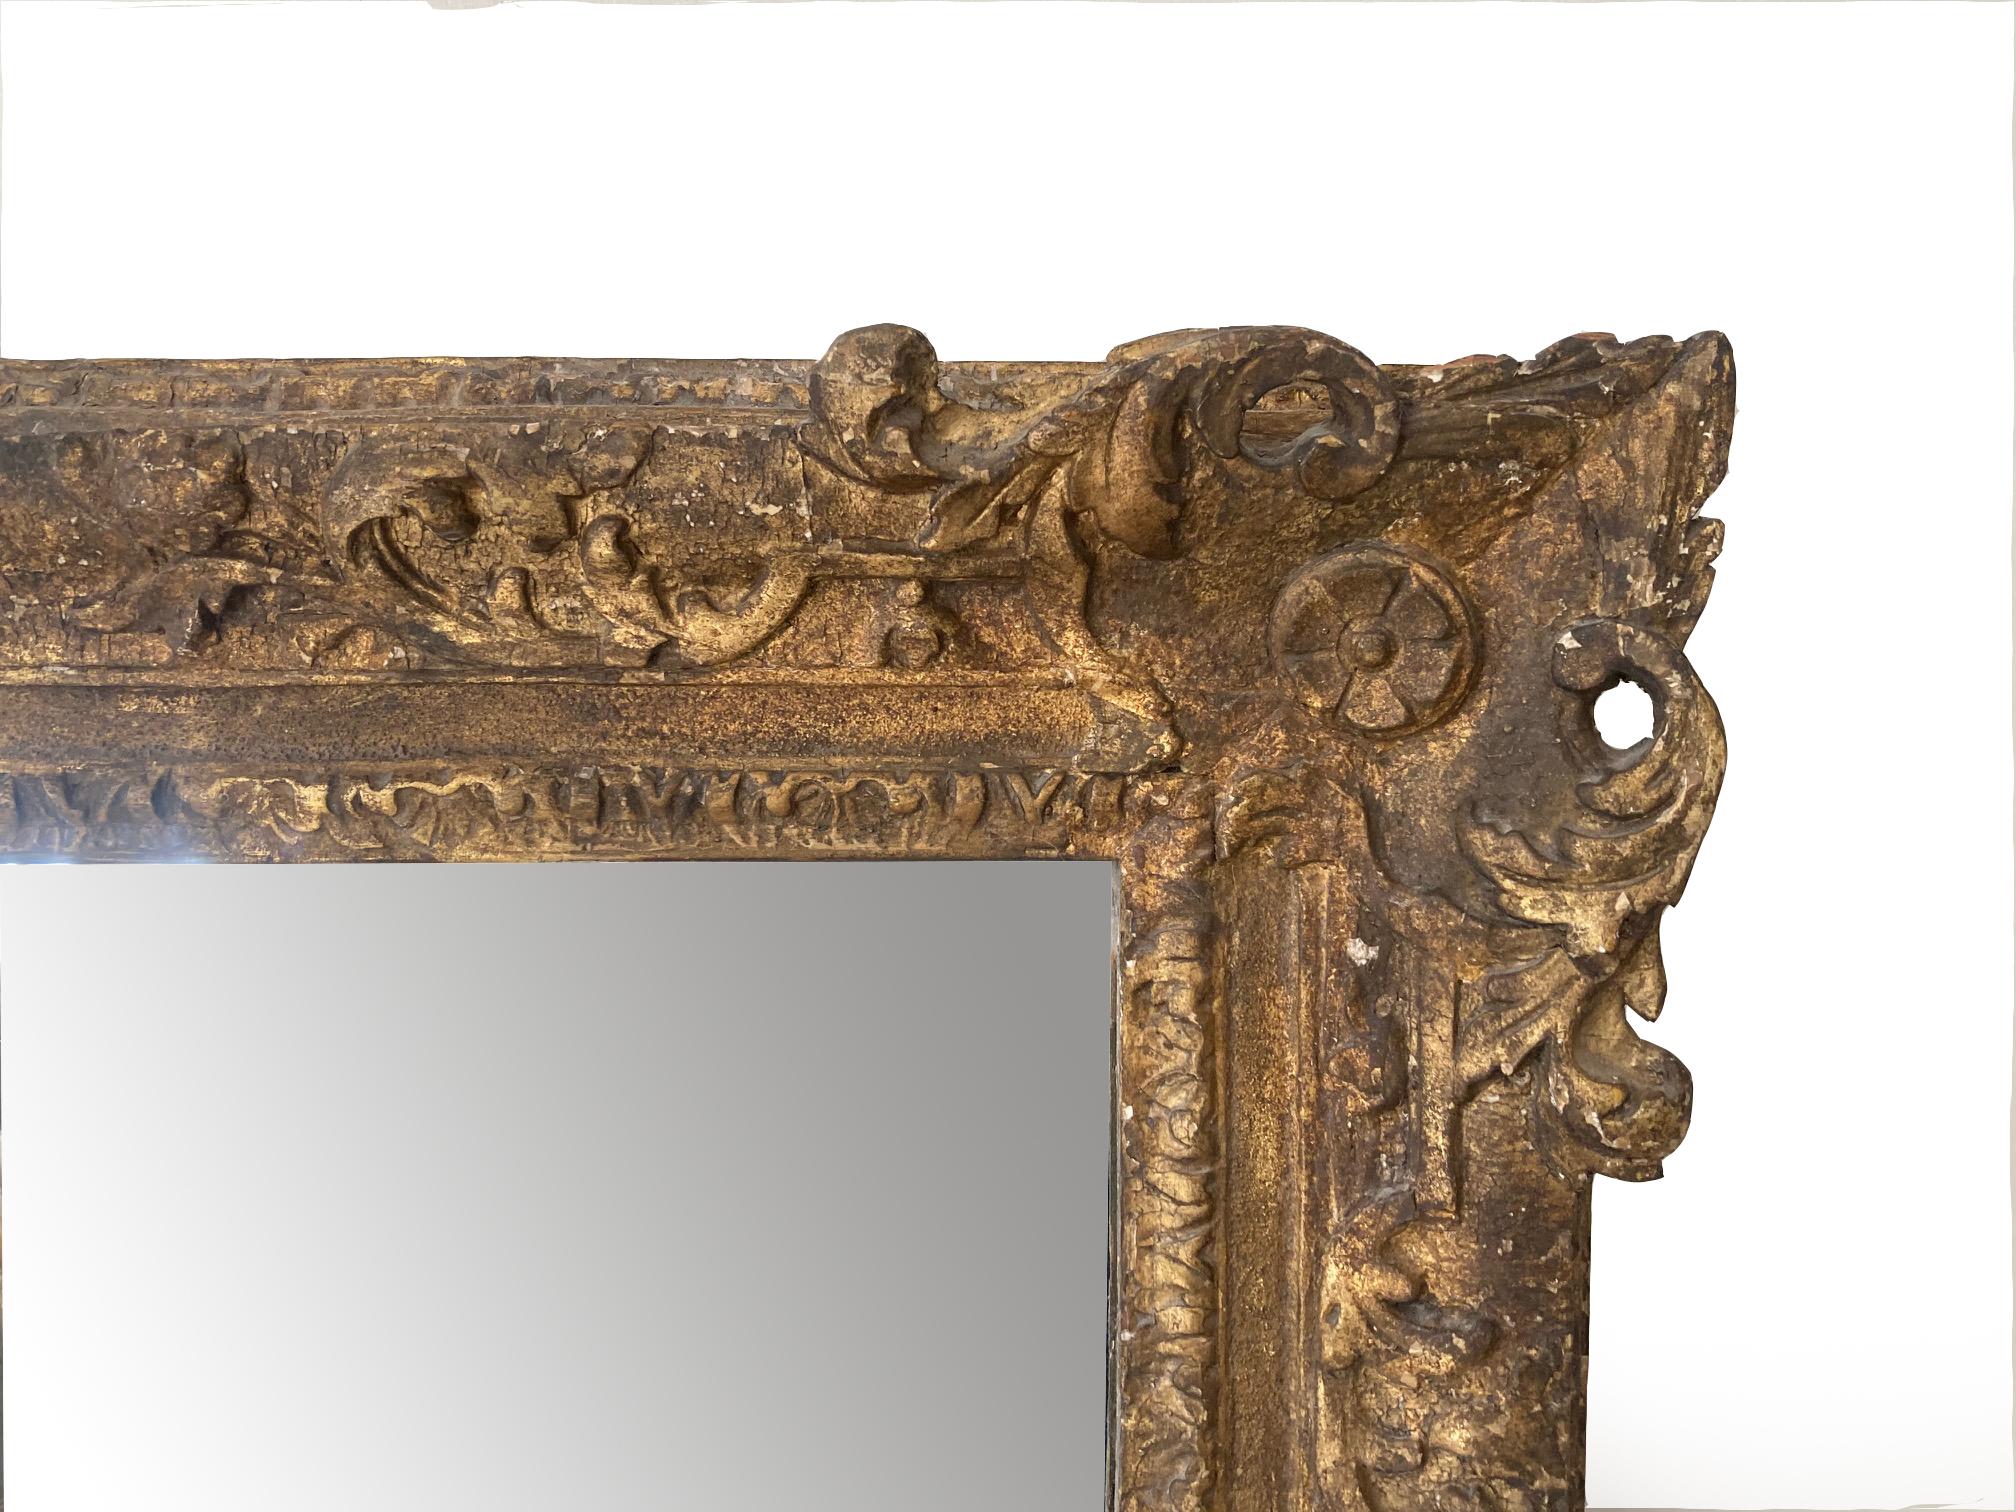 This one-of-a-kind mirror was constructed from a George I frame, circa 1720, with mirror glass installed, making it a beautiful choice for an over-the-mantle mirror. It is carved wood and of the type attributed to Lely. I simply added a mirror plate